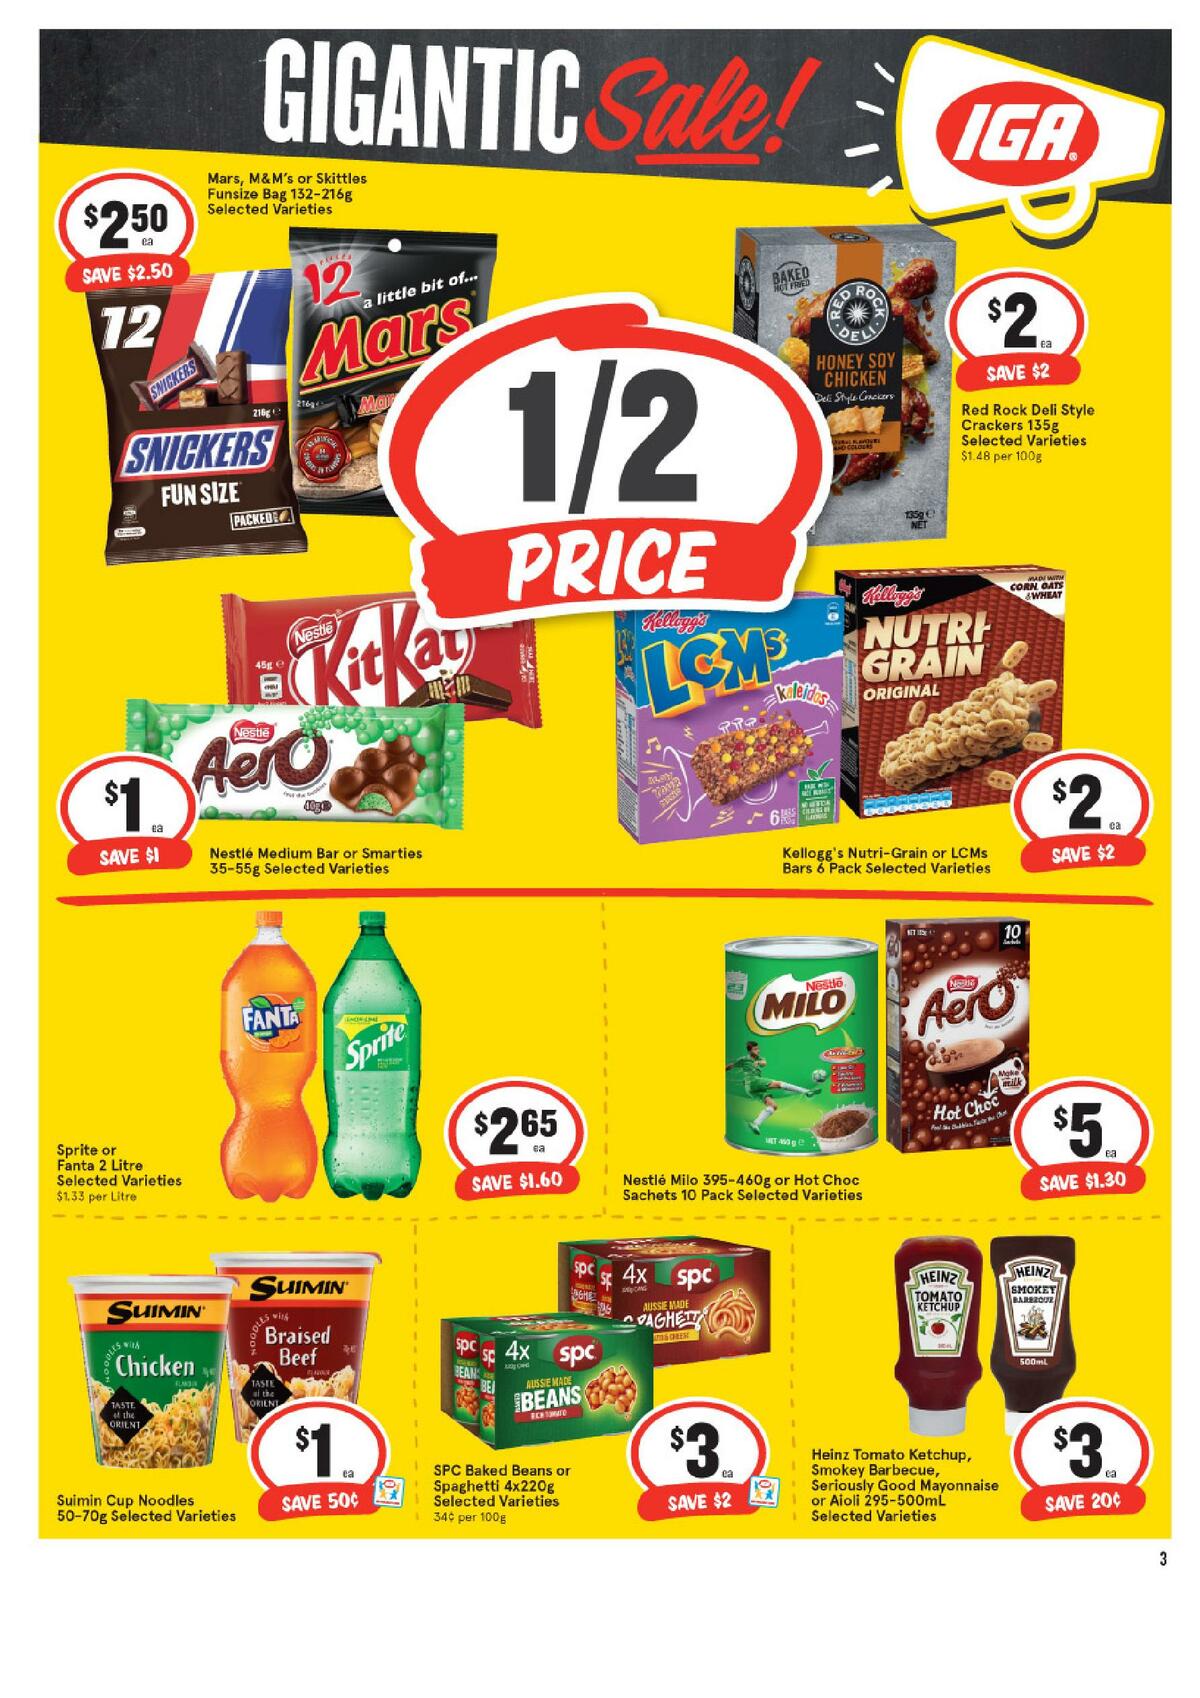 IGA Catalogues from April 21